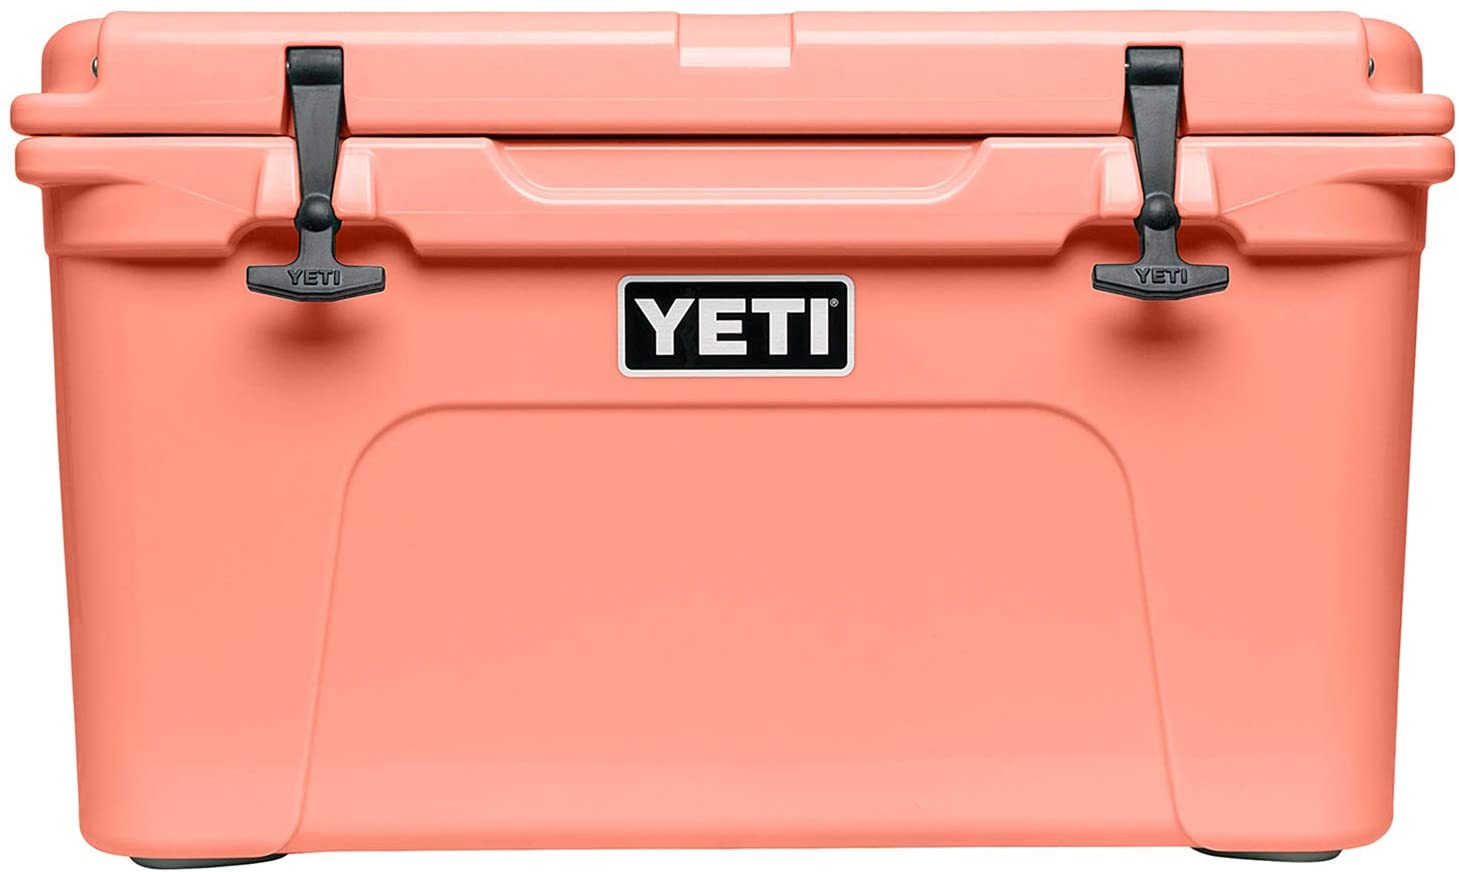 A YETI cooler on a white background.